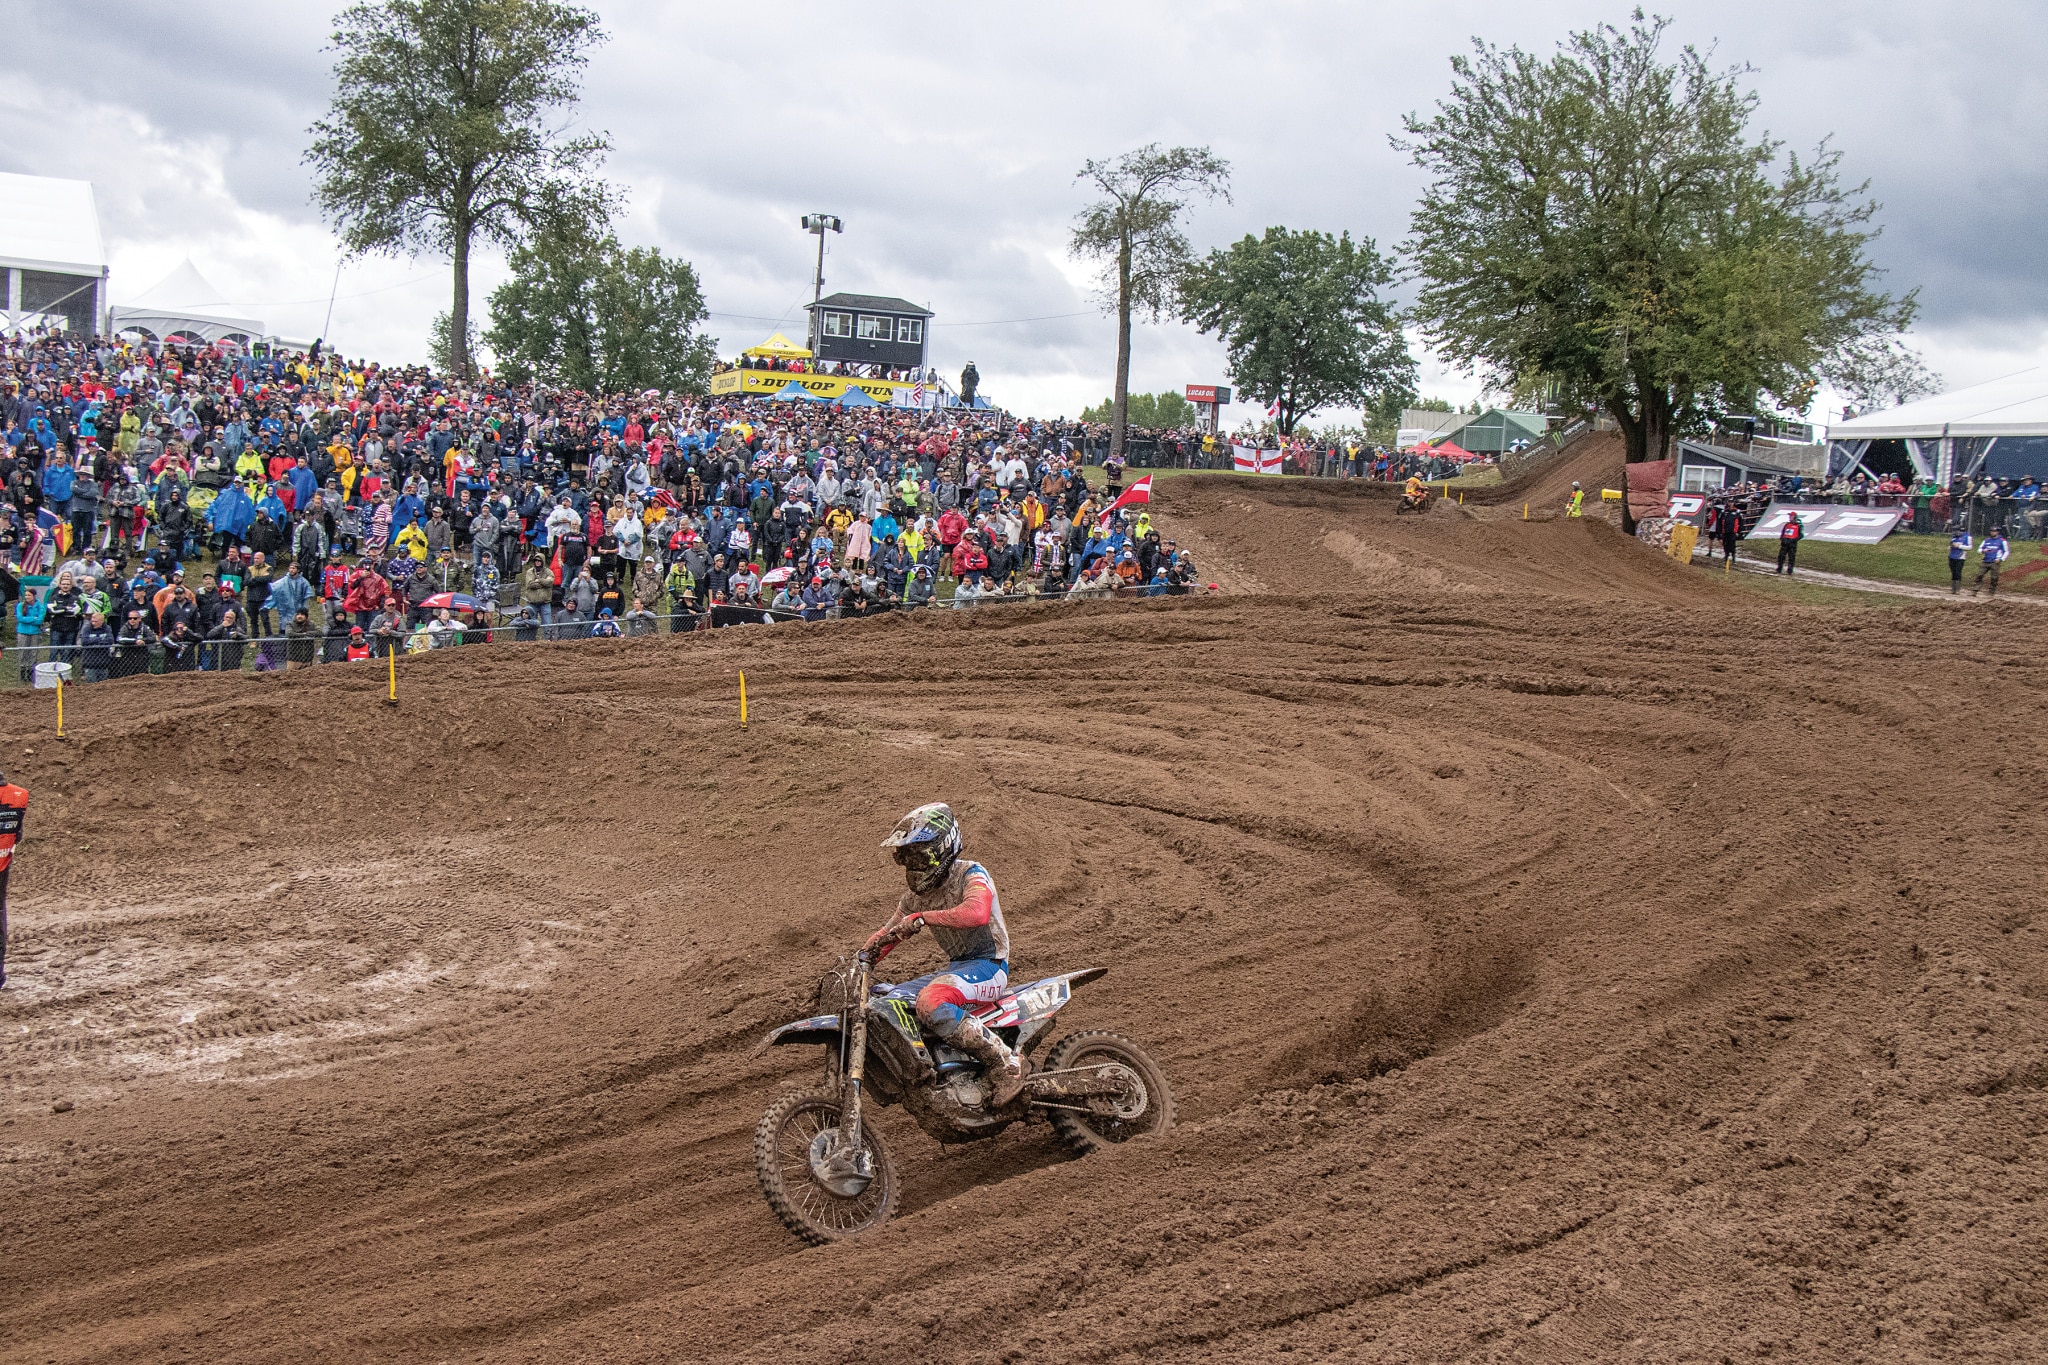 2022 RED BUD MXDN FLASHBACK THE MOTOCROSS DES NATIONS DROUGHT IS OVER FOR TEAM USA